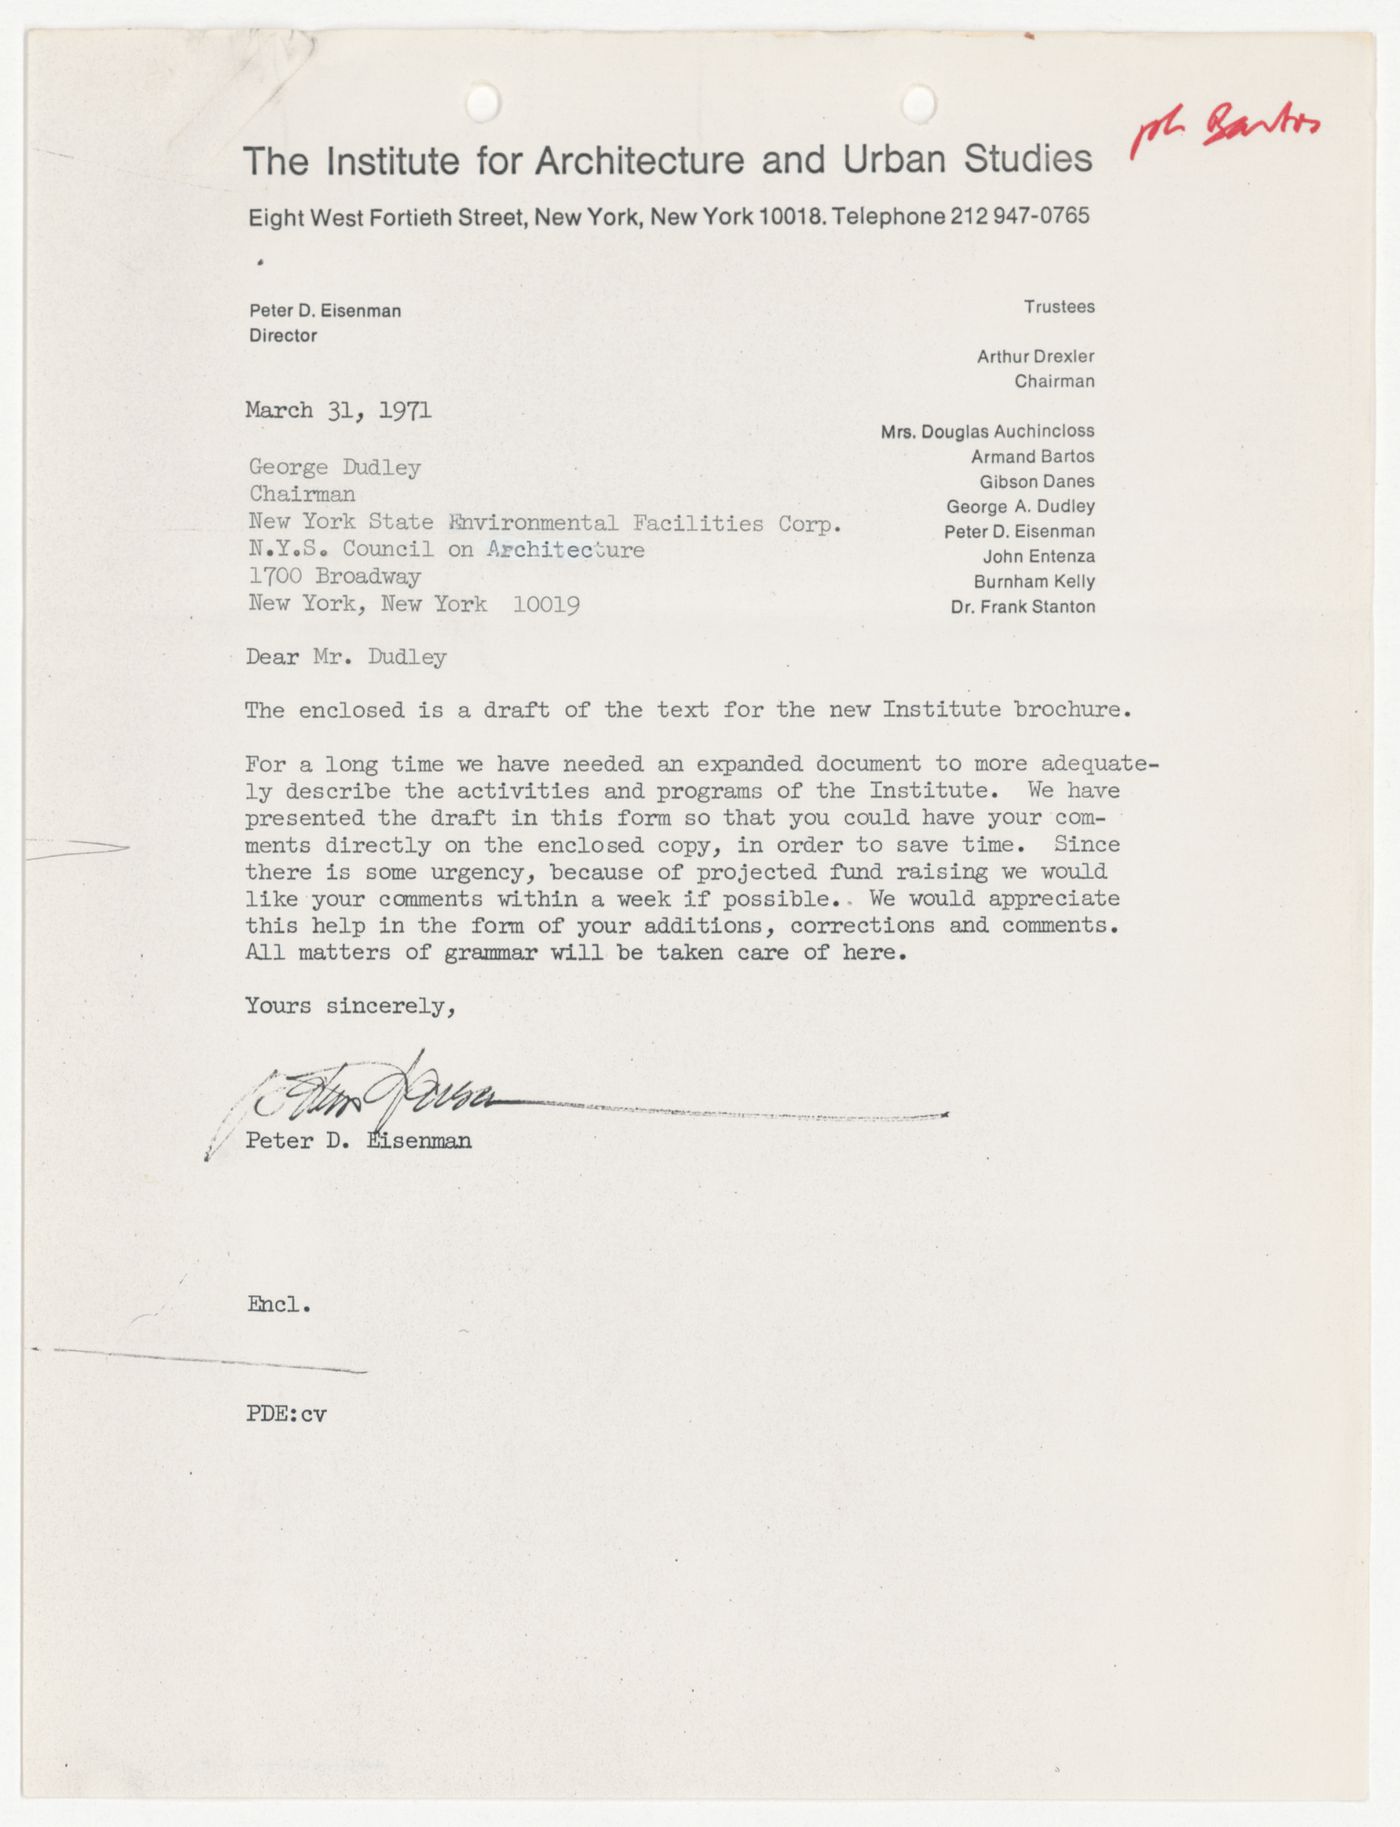 Letter from Peter D. Eisenman to George Dudley with attached draft text for IAUS brochure